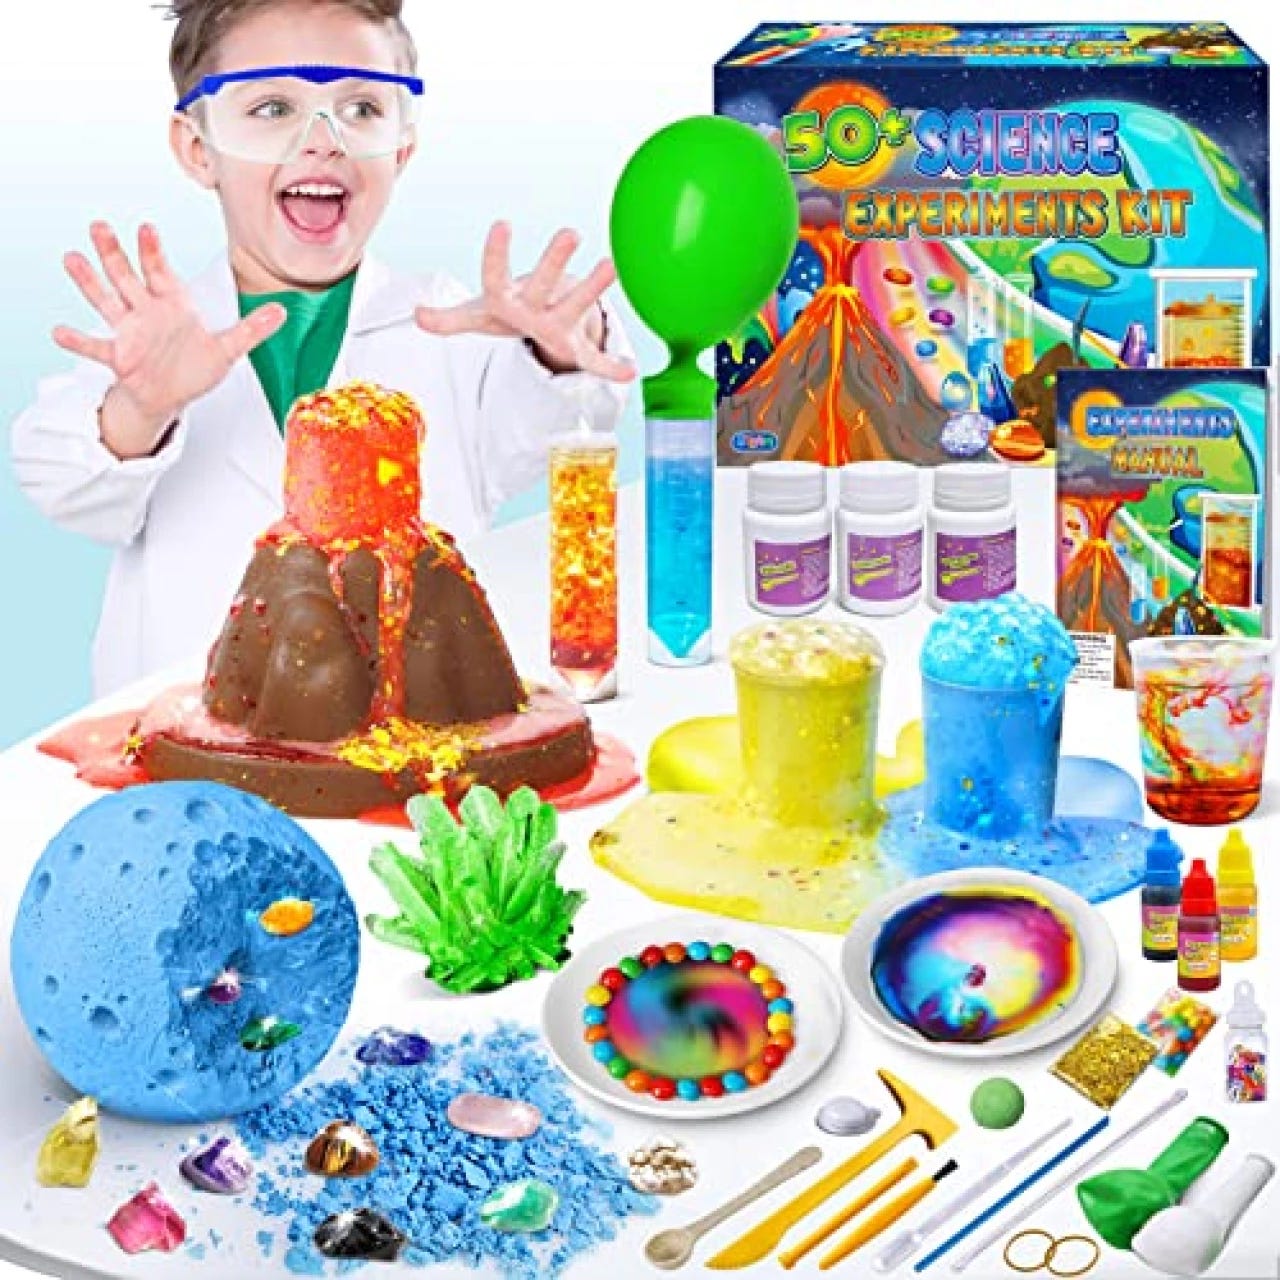 Doctor Jupiter Toy Kit for Kids 4-6 Year Olds, Science Experiments